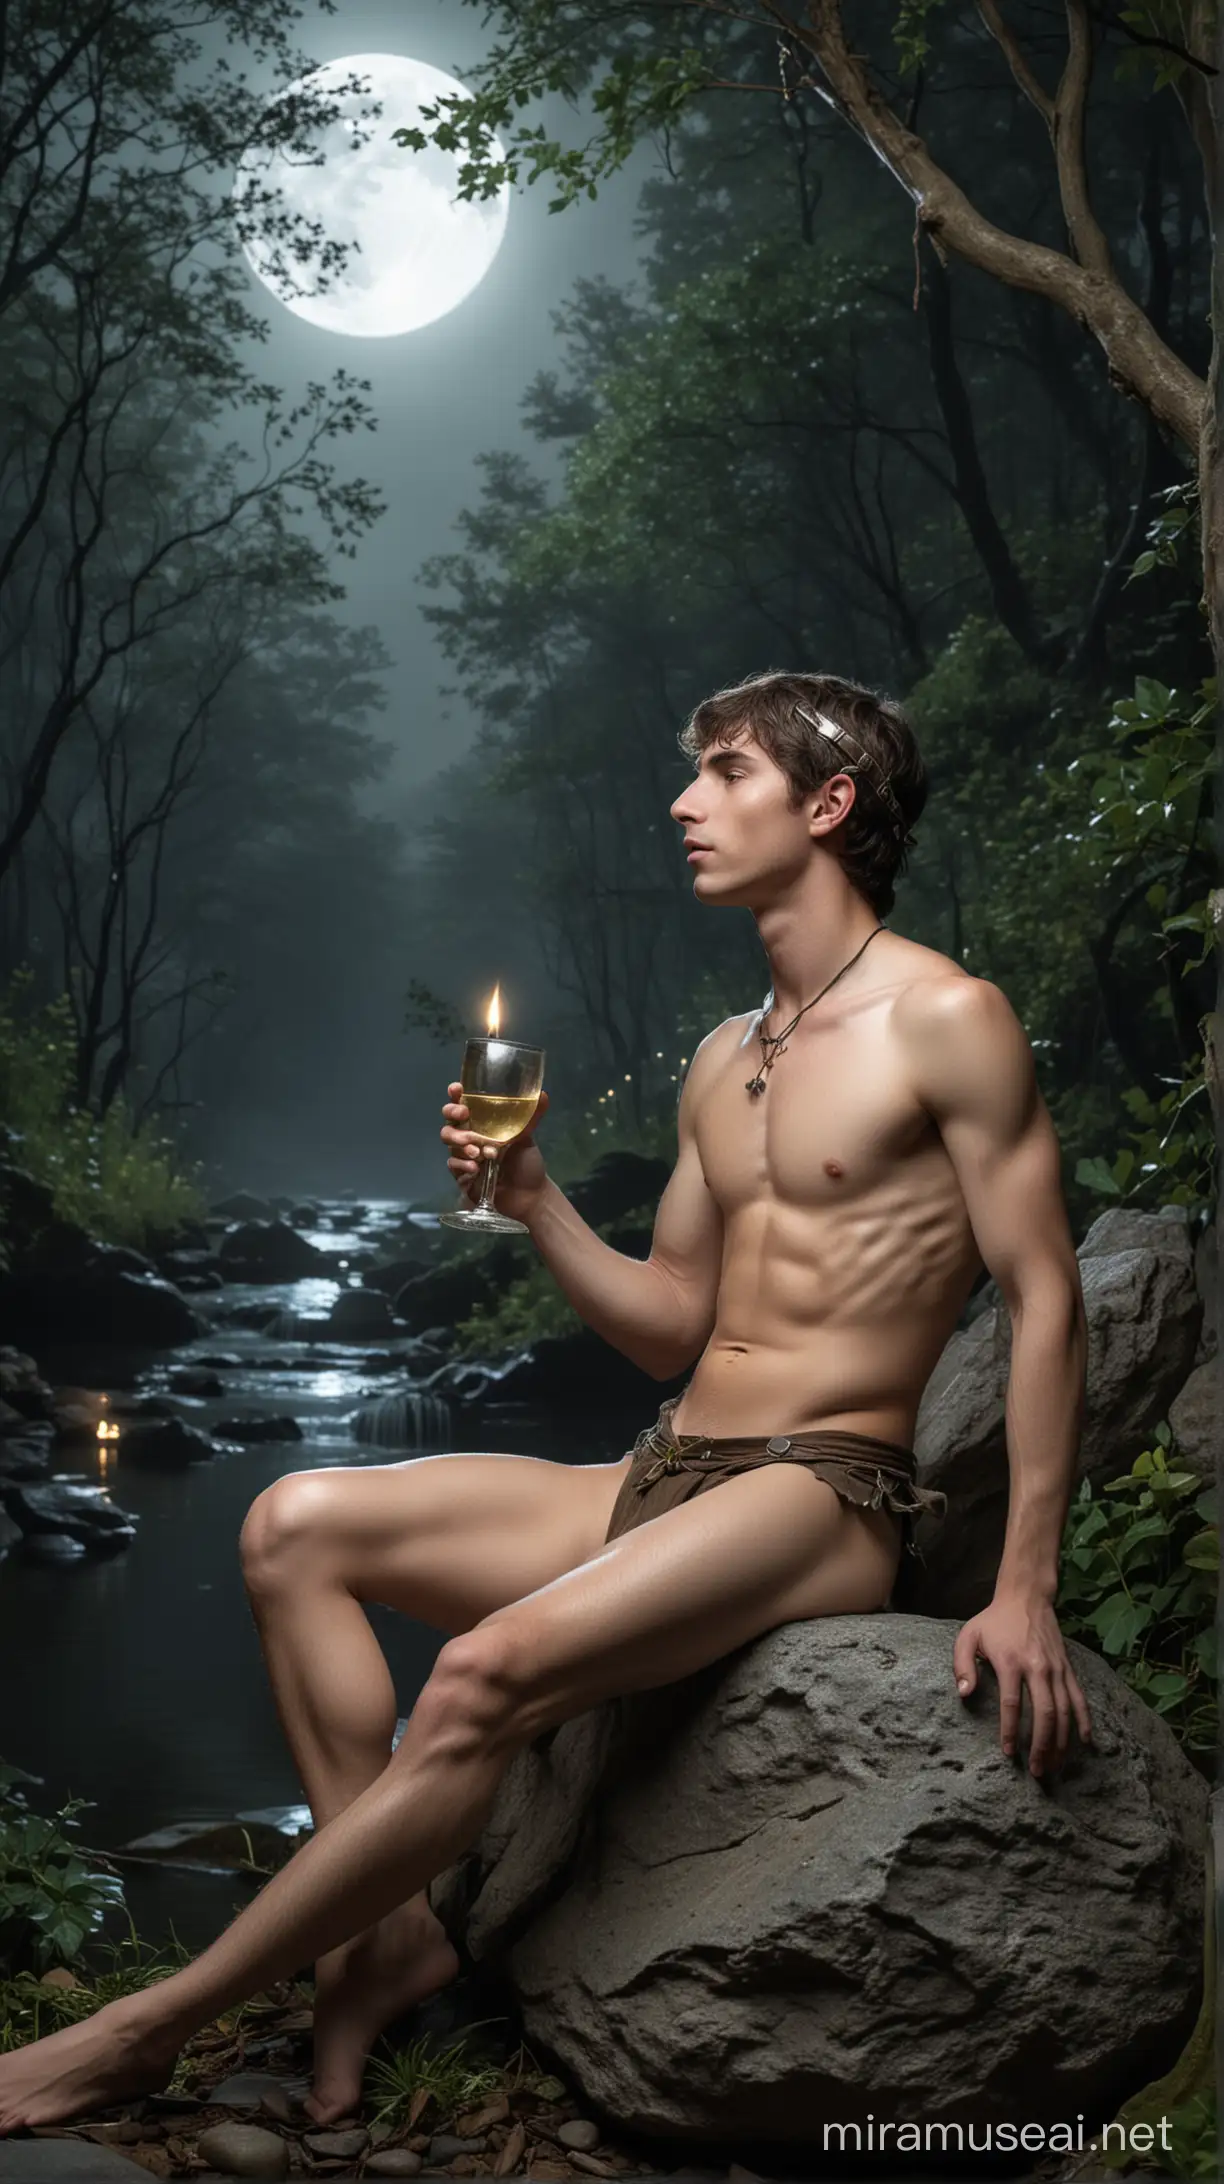 Young Male Elf Sitting on Rock in Enchanted Forest Moonlight